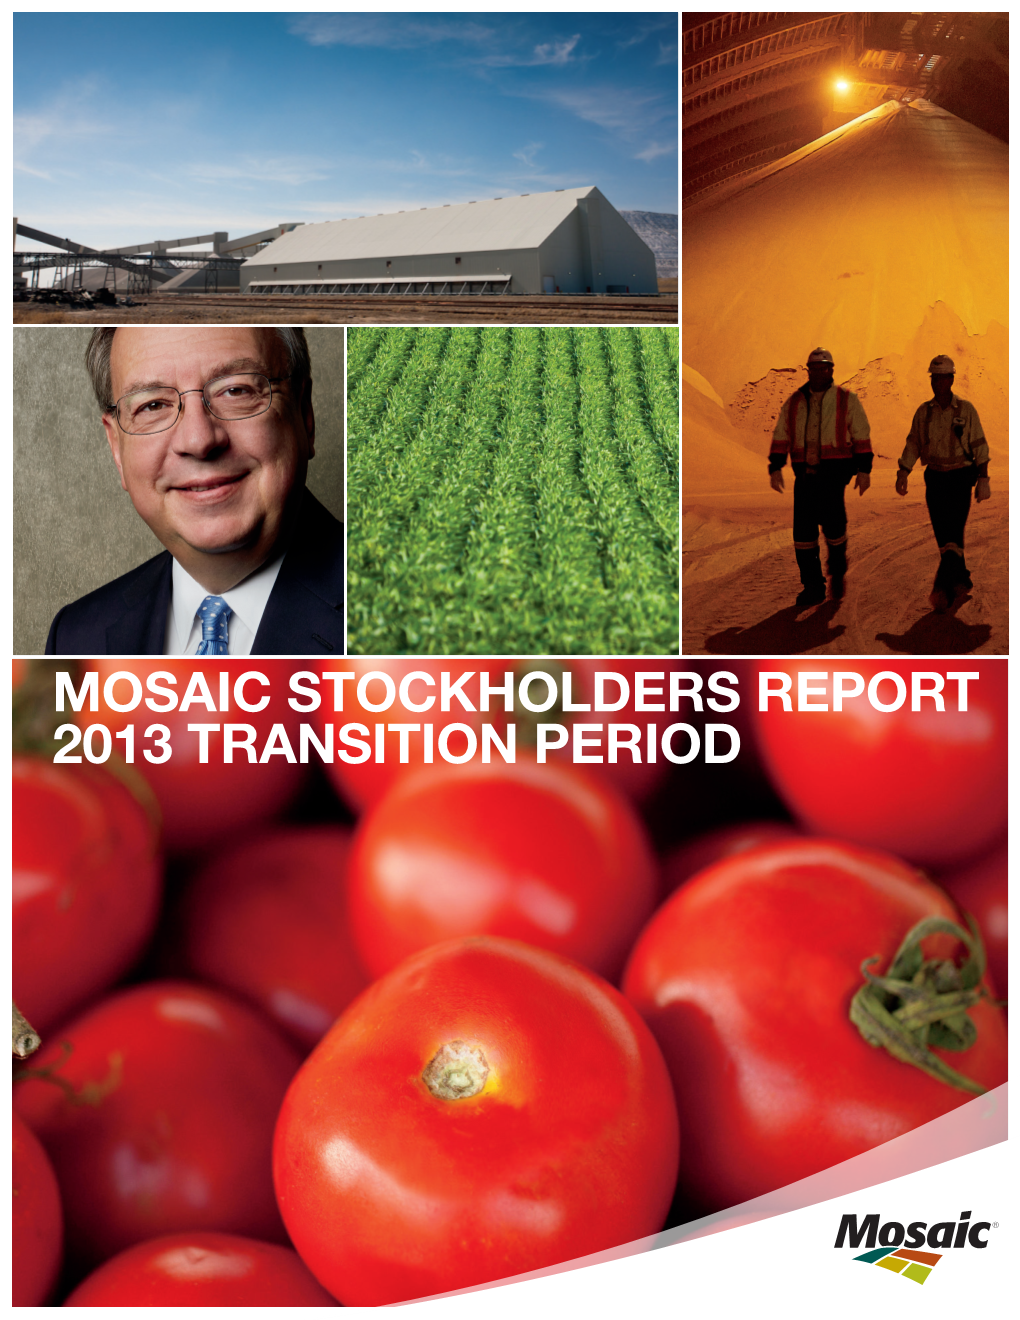 Mosaic Stockholders Report 2013 Transition Period Financial Highlights